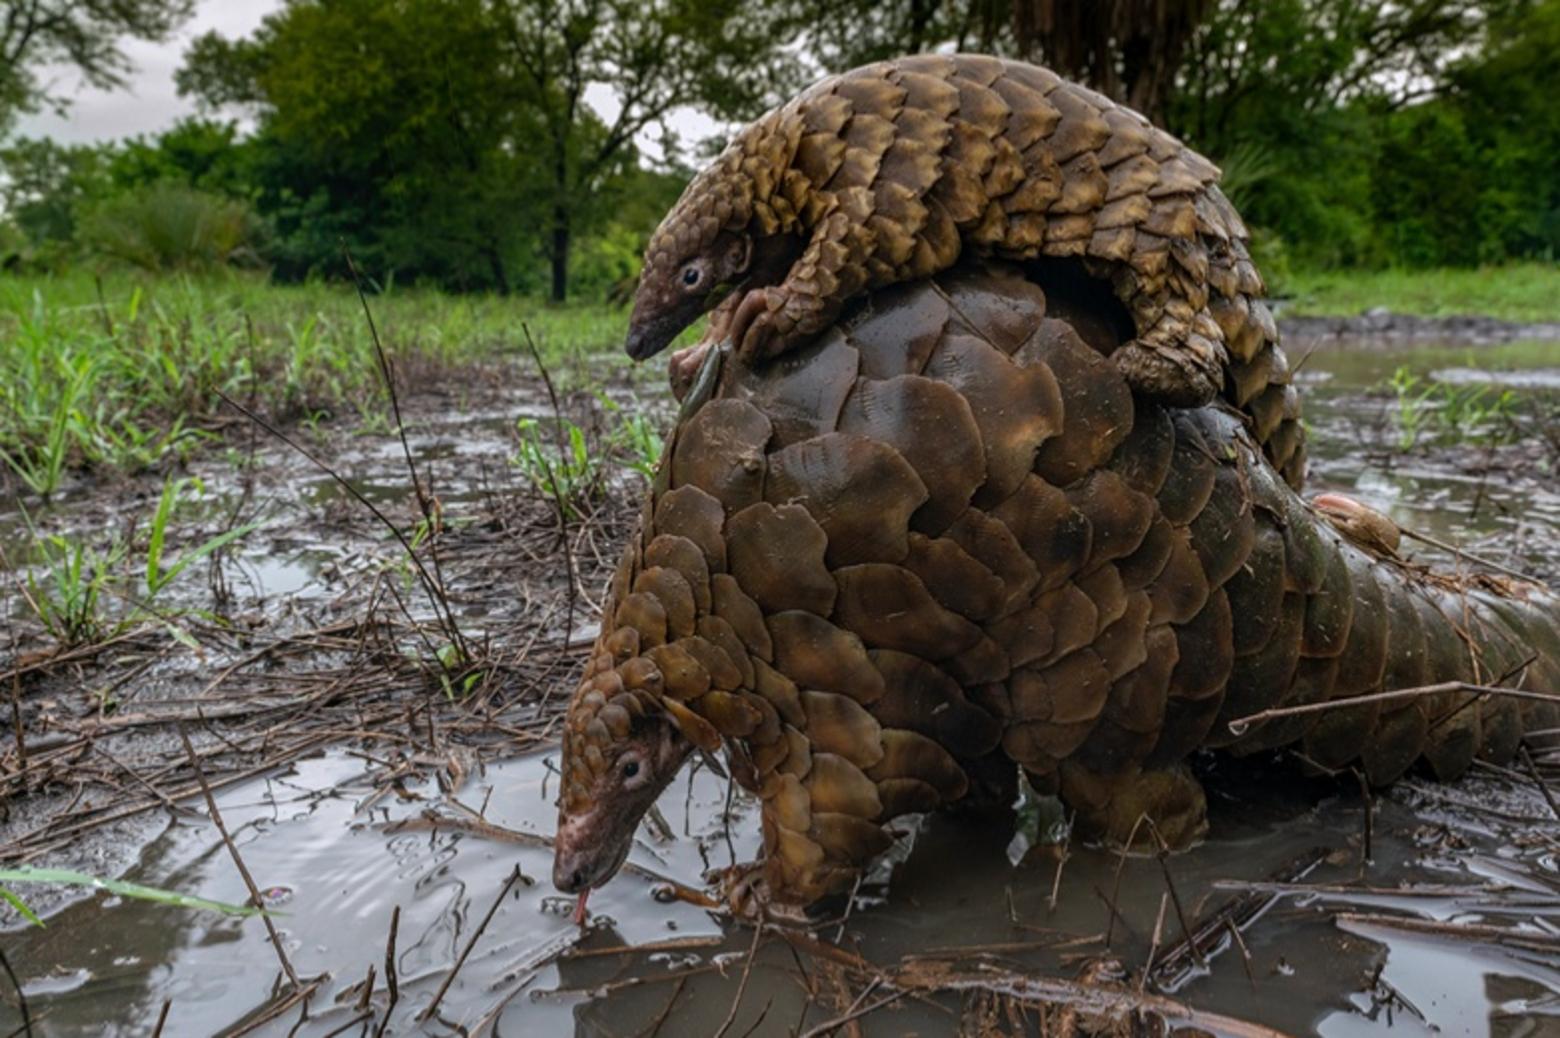 Pangolins, a critically endangered species also known as scaly anteaters, are threatened by poachers who eat them and blackmarket traders who sell them in China where their parts are used in traditional Chinese medicine. Gorongosa serves as an important refuge for pangolins. Photo courtesy Gorongosa National Park.